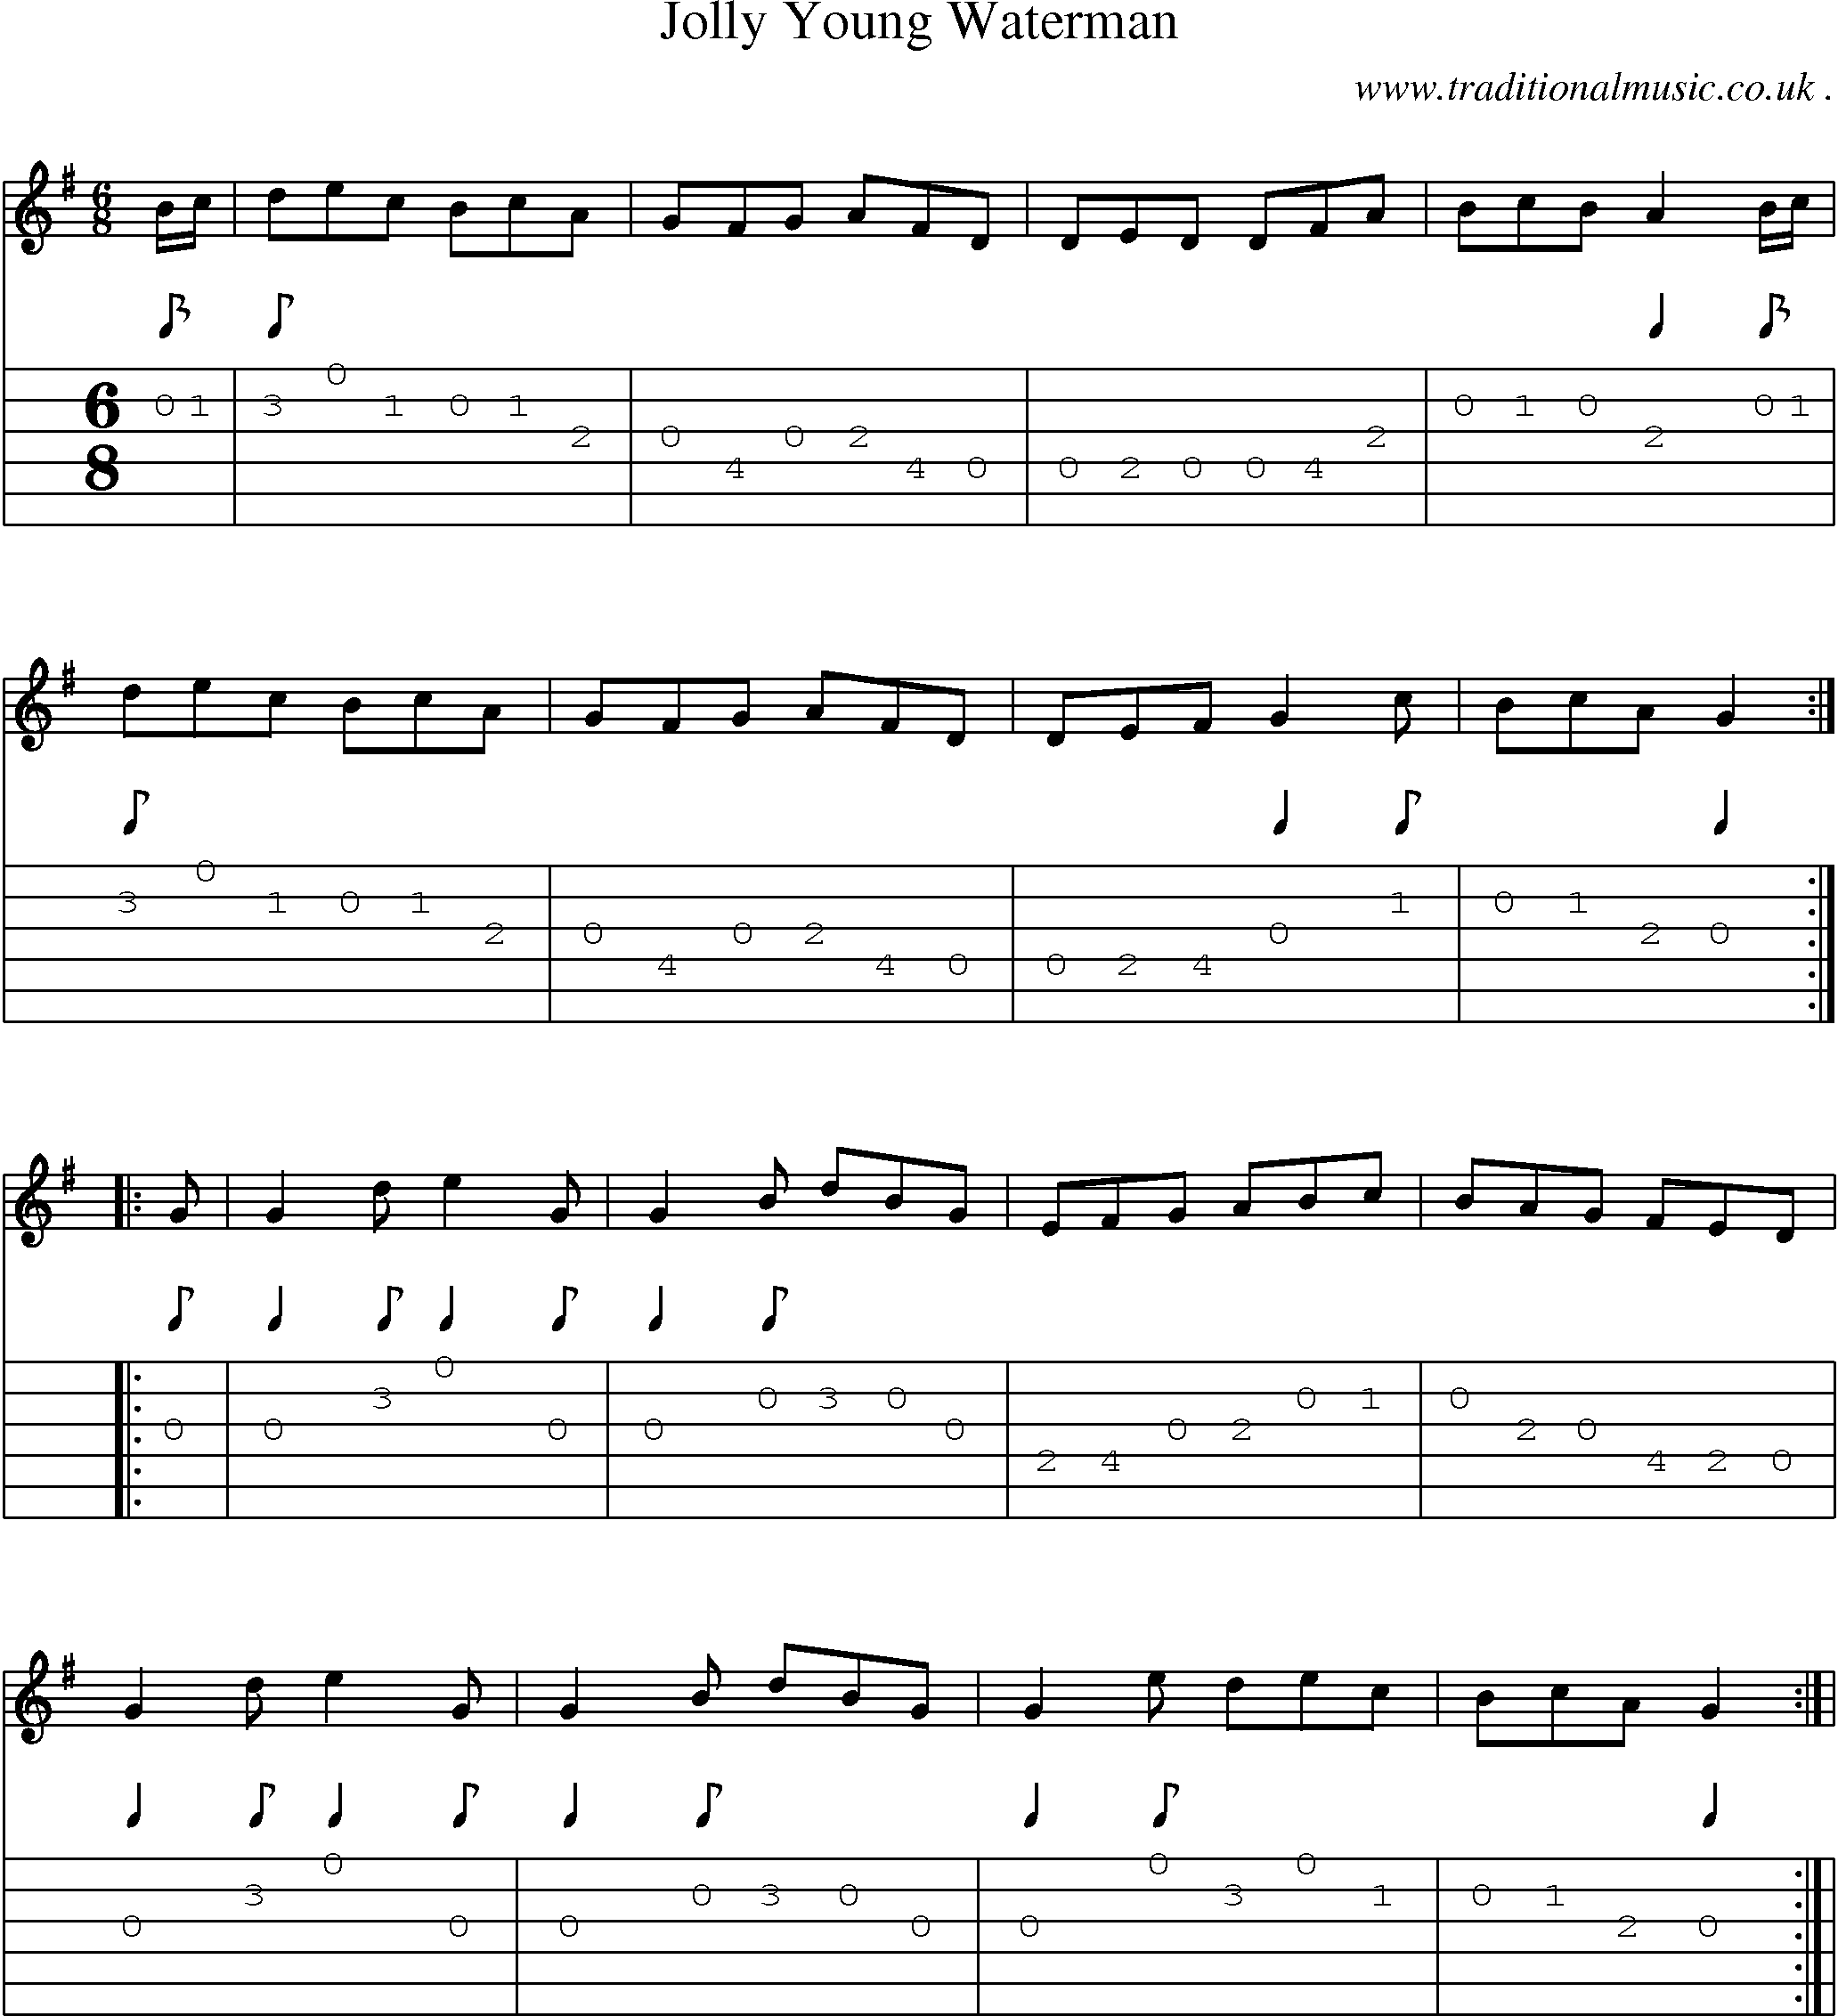 Sheet-Music and Guitar Tabs for Jolly Young Waterman